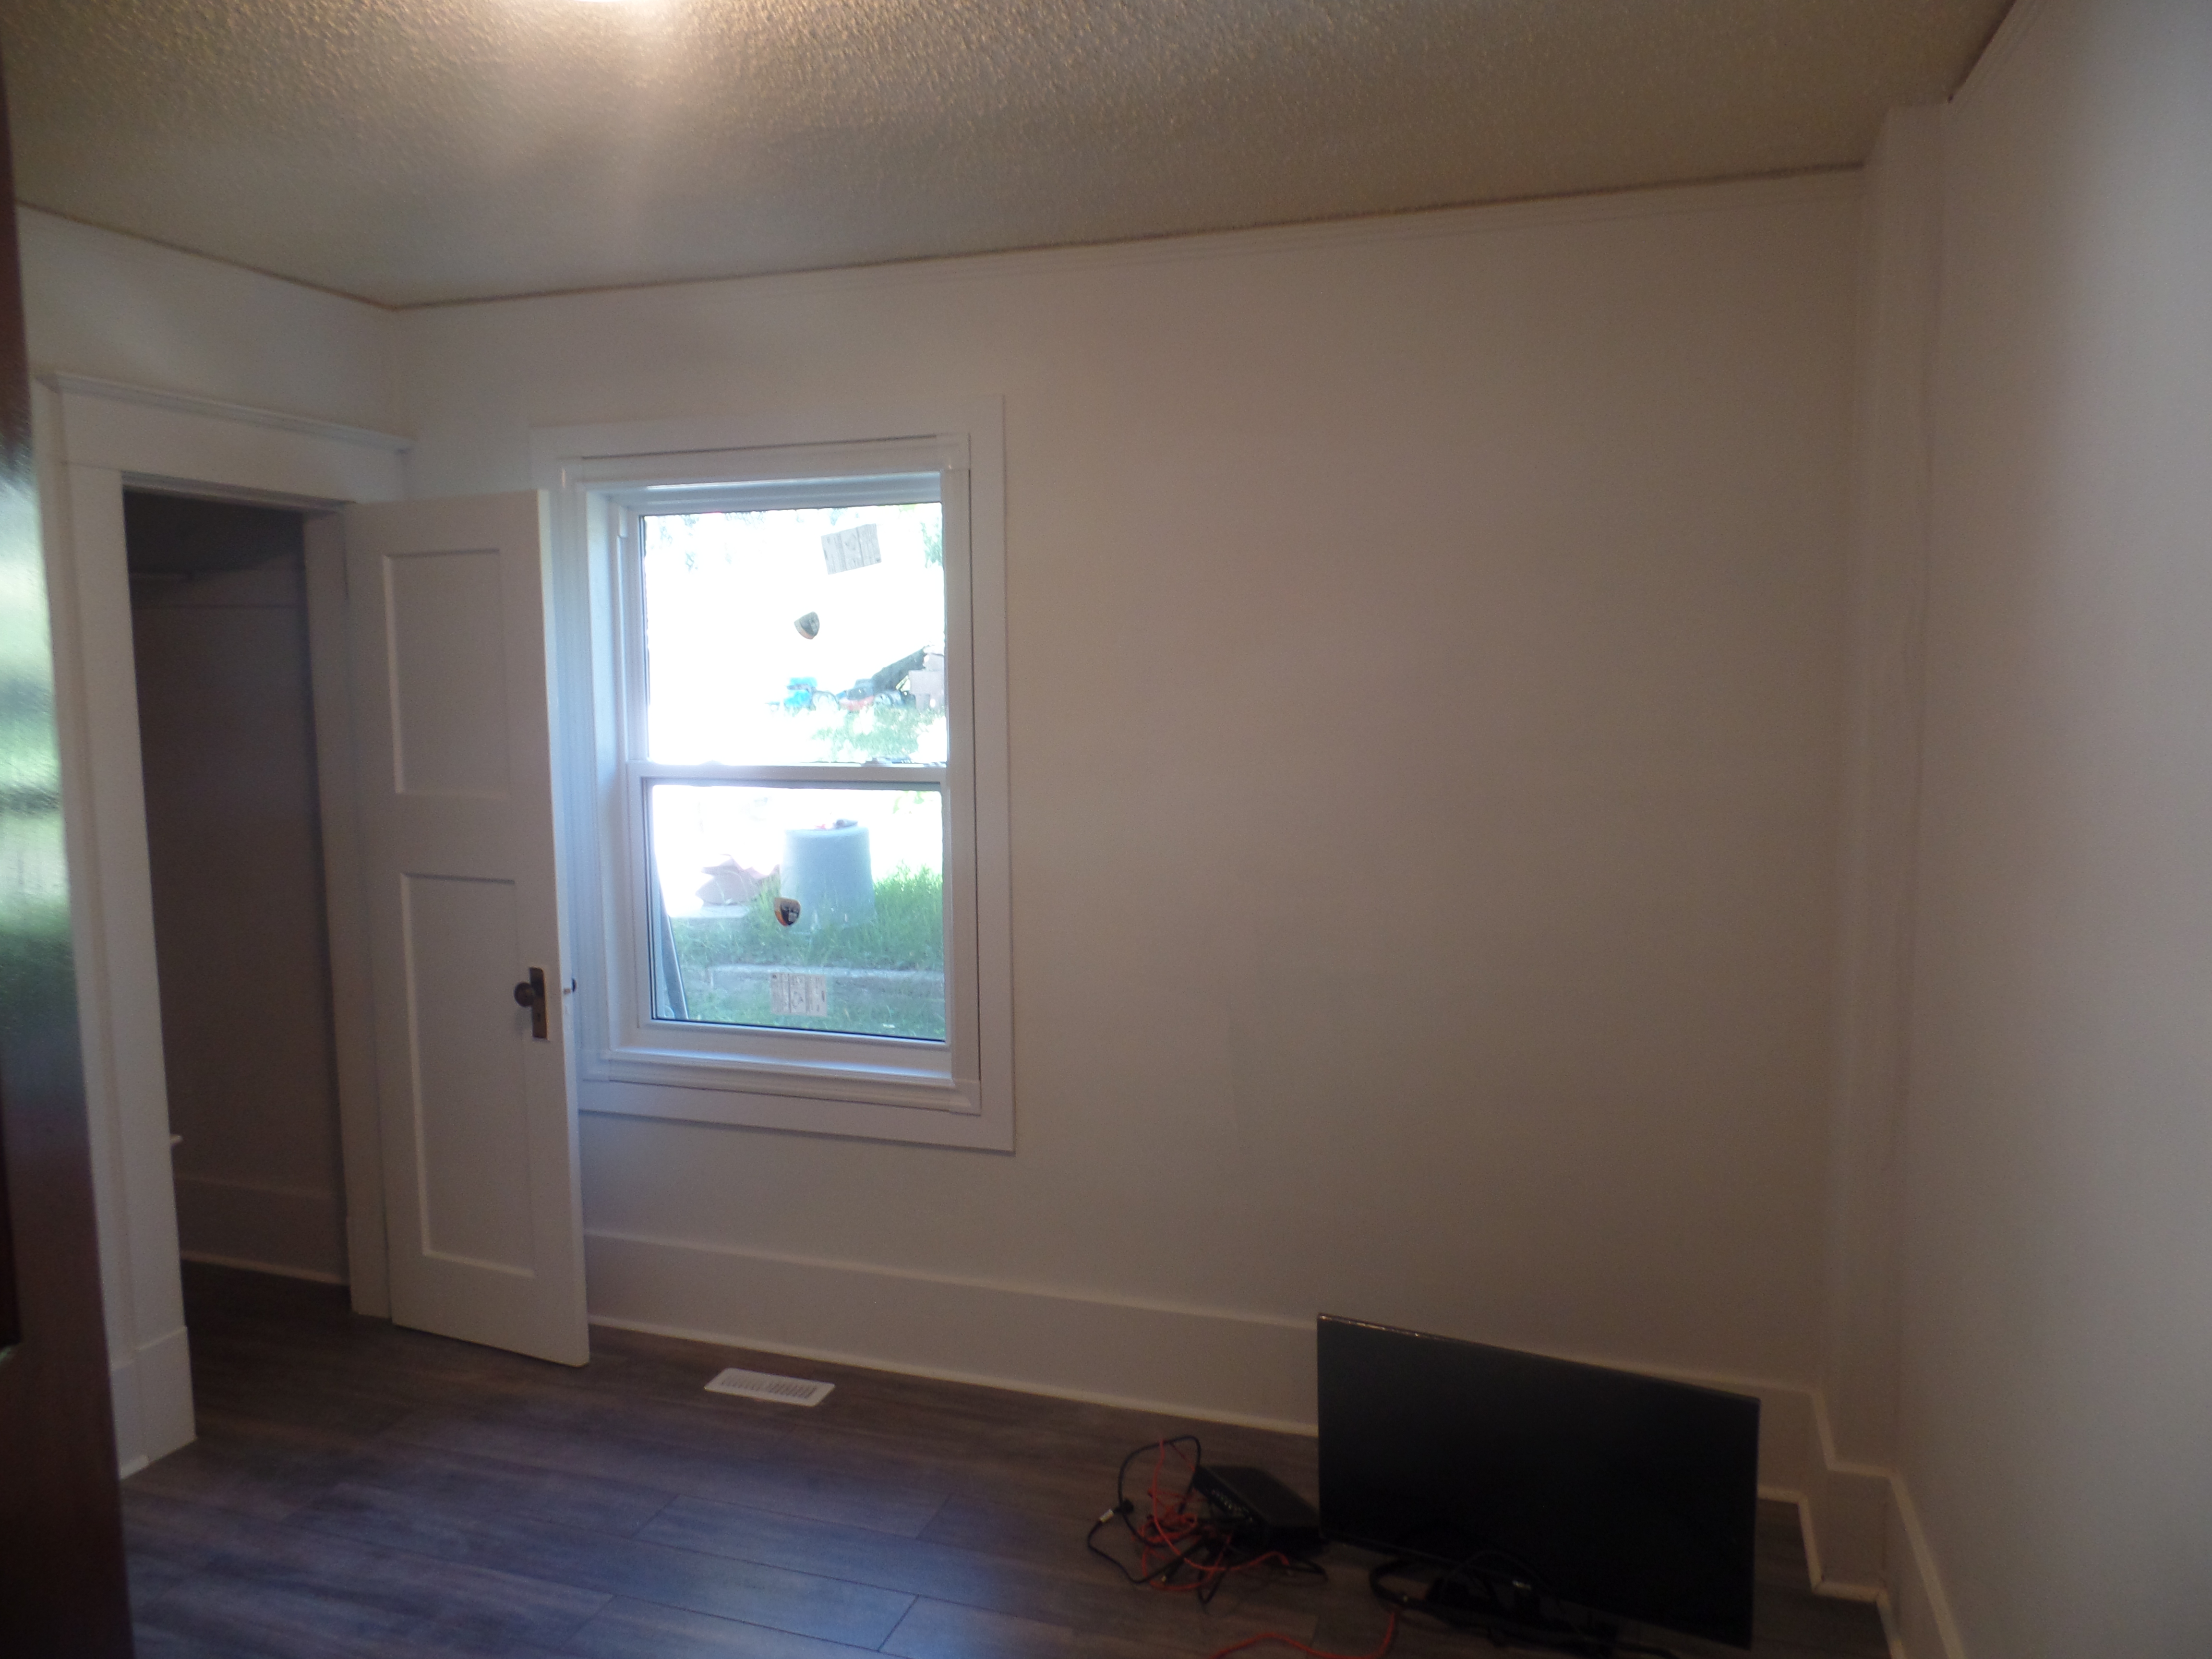 1 bdrms, top floor property for rent in Parkhill SW near Stampede!